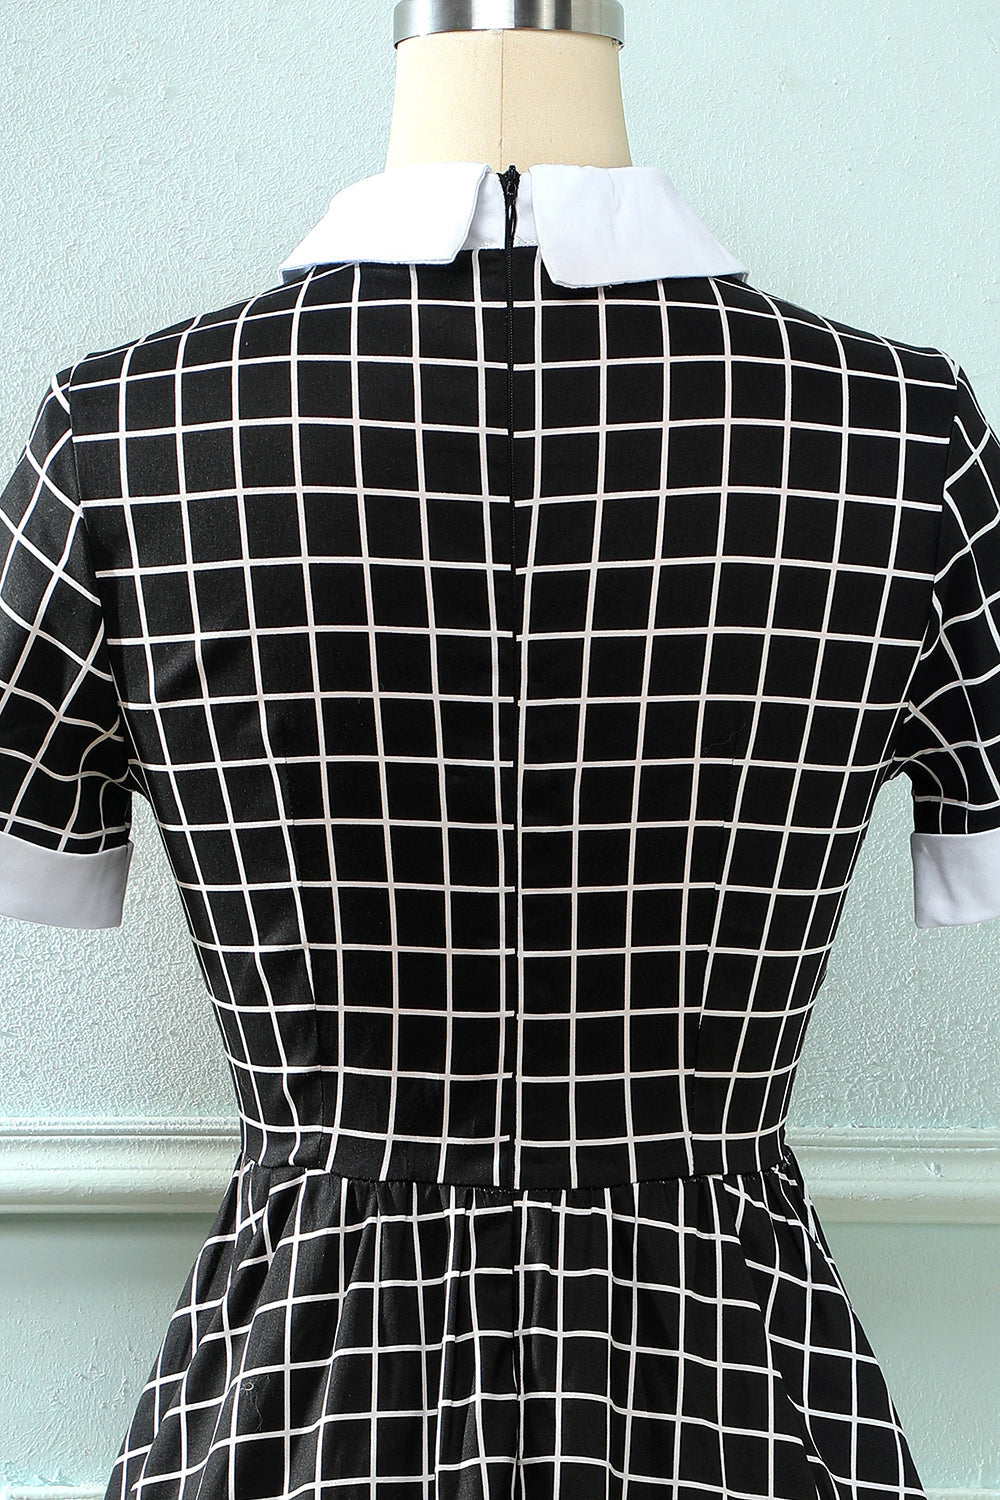 Plaid 1950s Vintage Dress with Bow